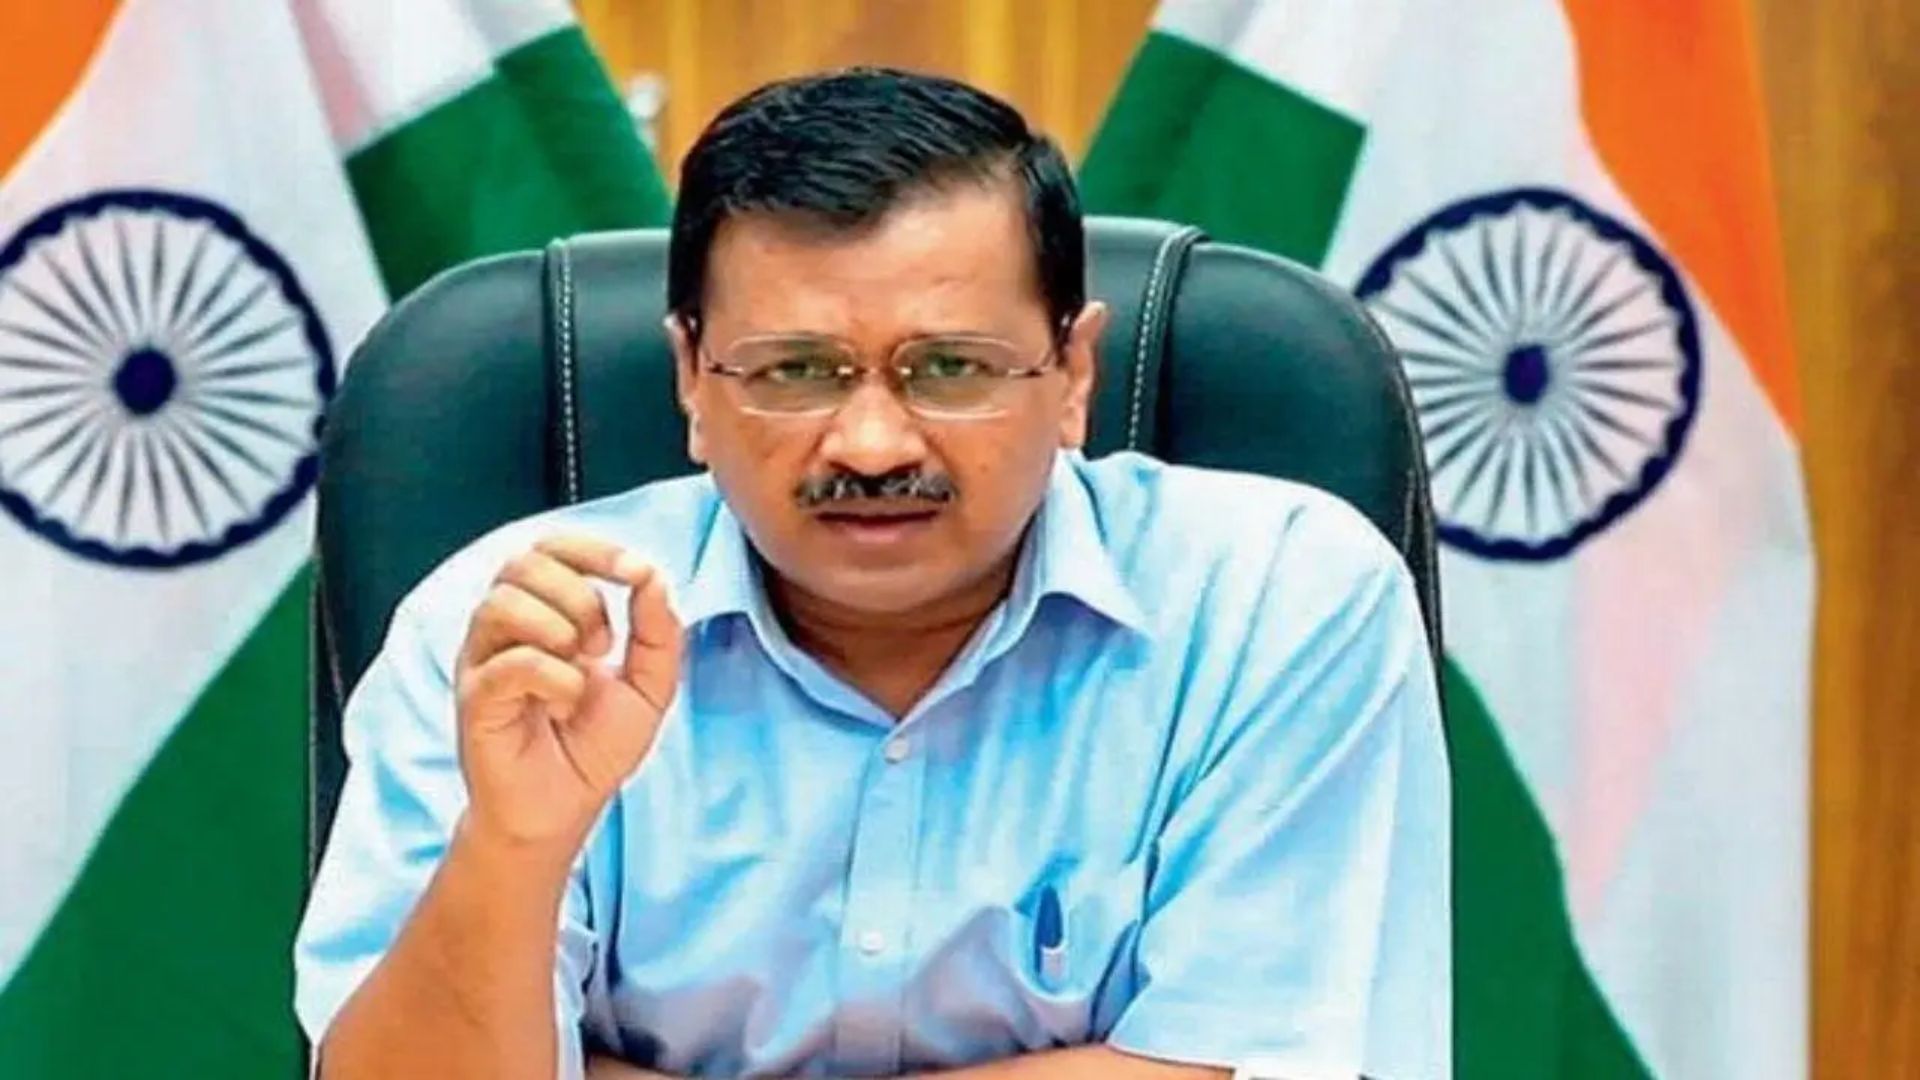 Delhi CM Kejriwal says the ED found nothing in raids on AAP MP’s residence